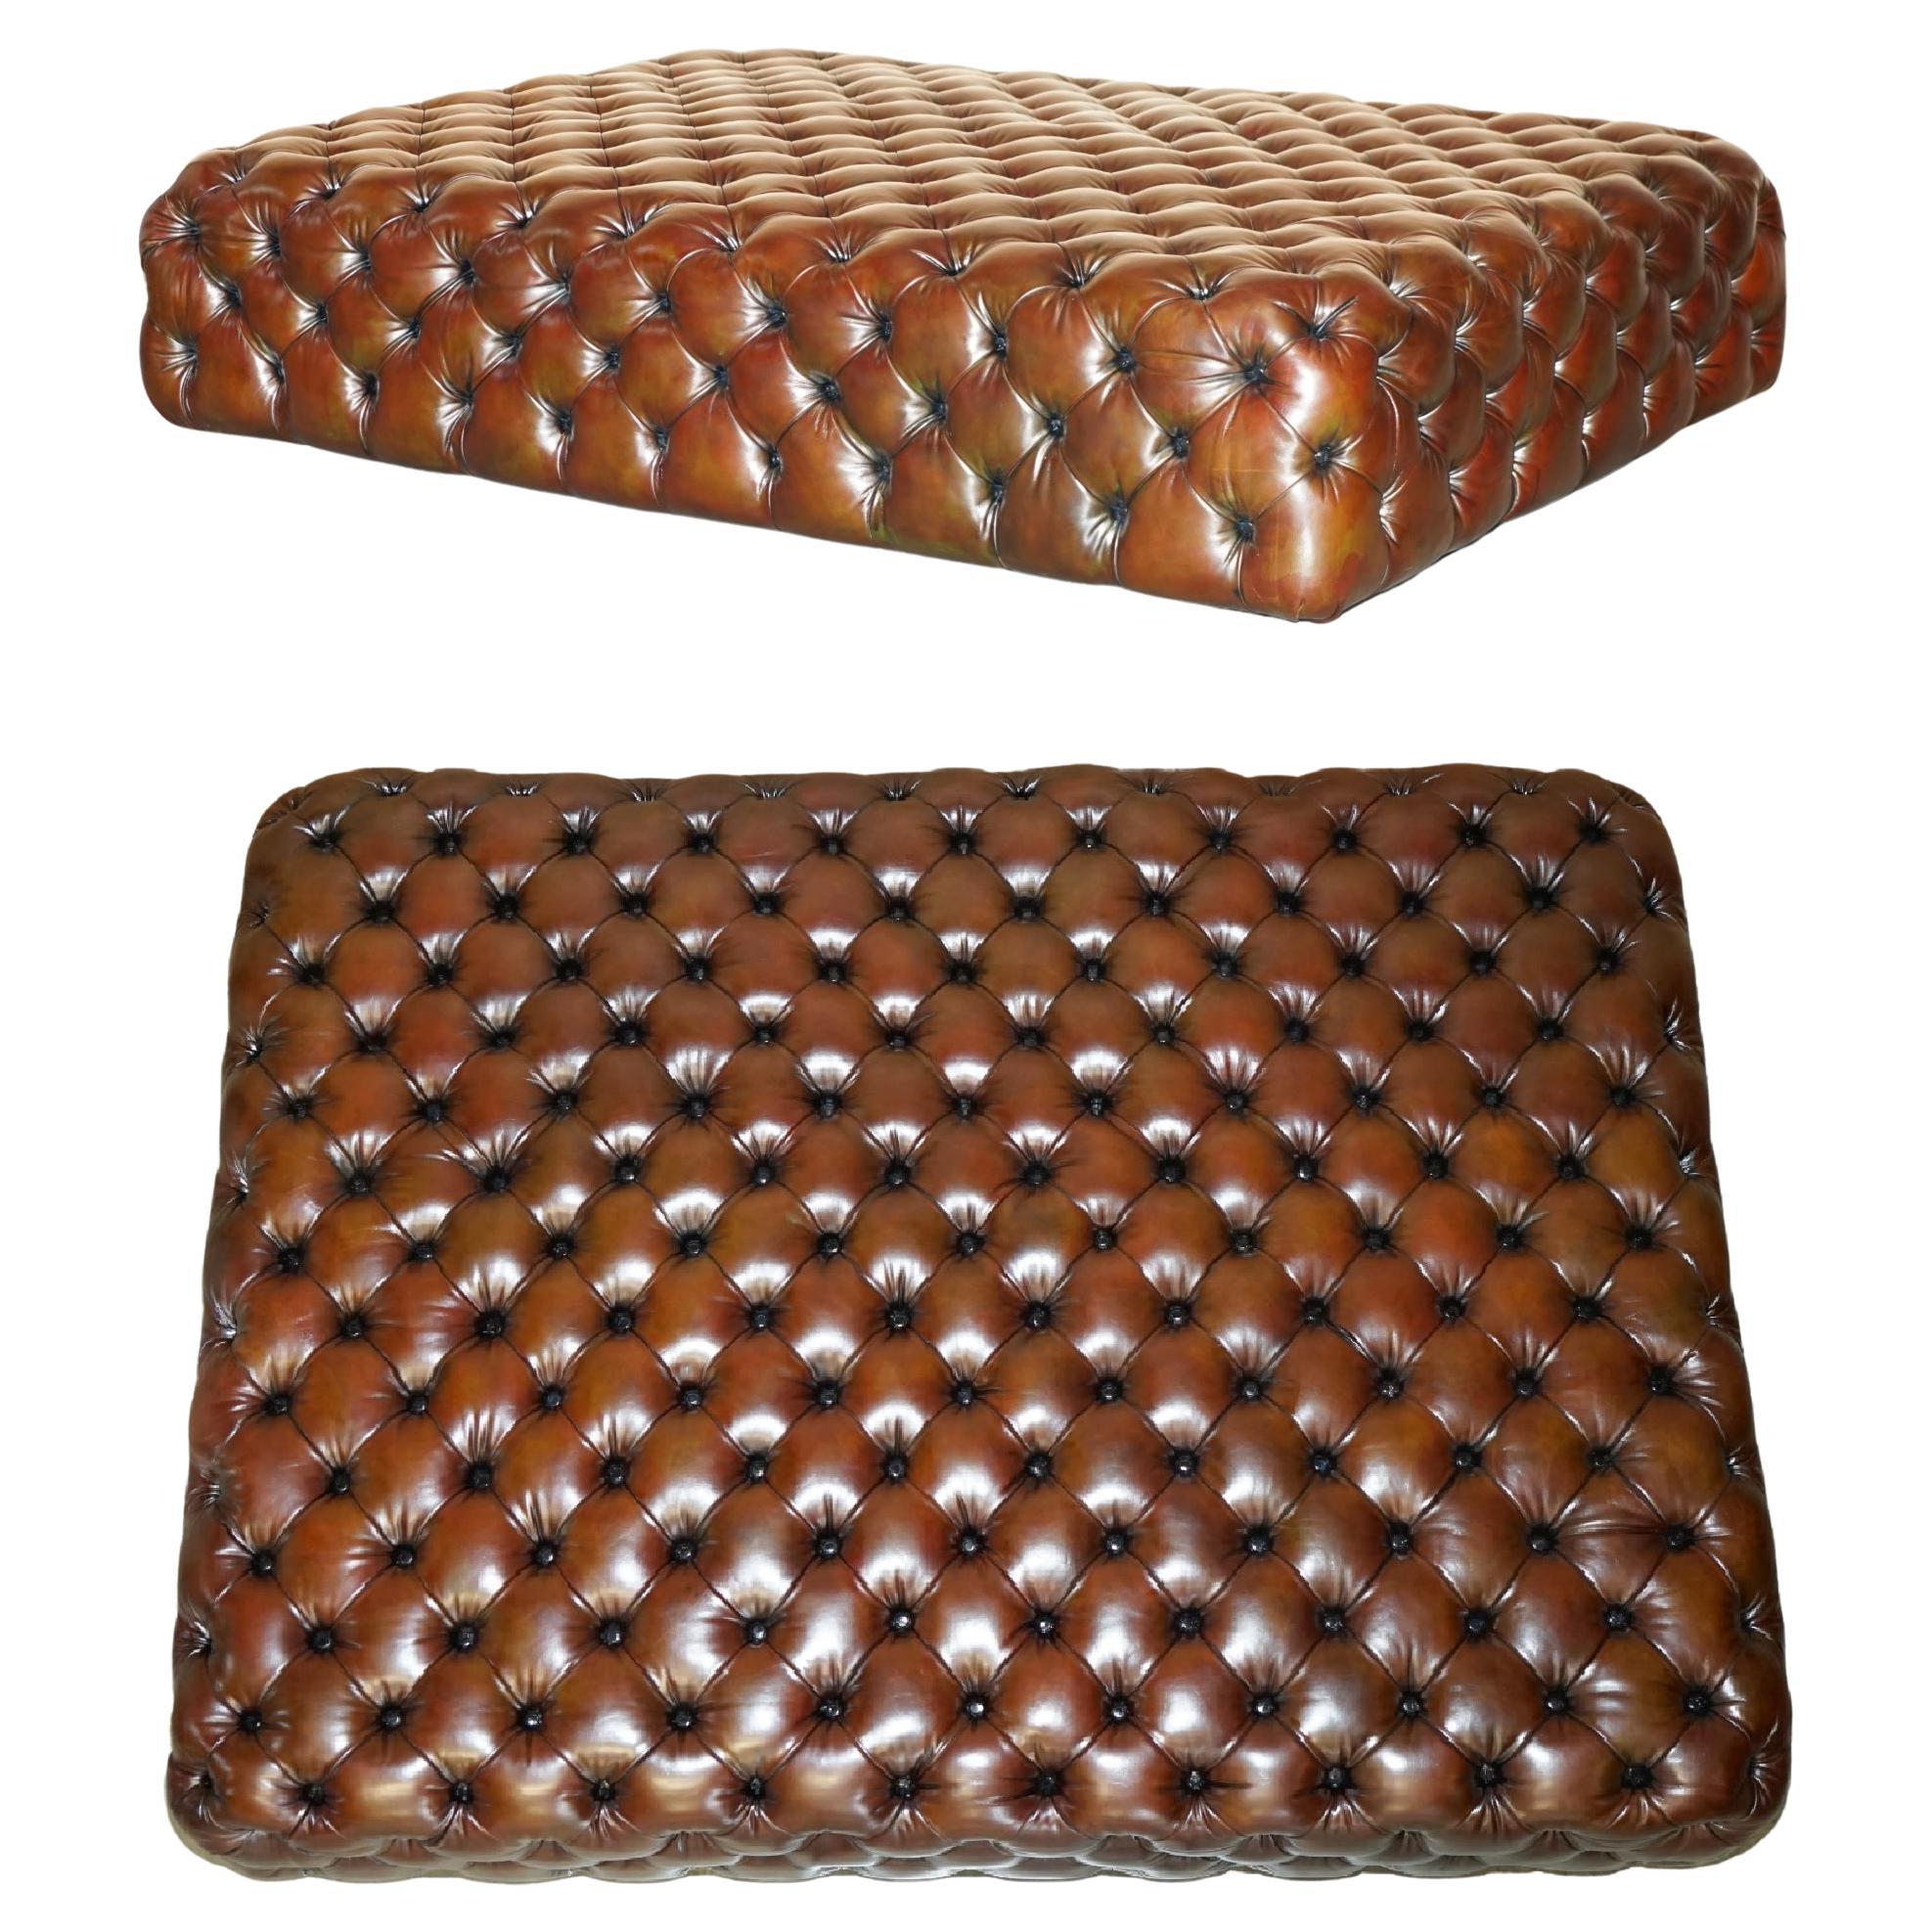 MONUMENTAL GEORGE SMITH RESTORIERT BROWN LEATHER CHESTERFiELD FOOTSTOOL OTTOMAN